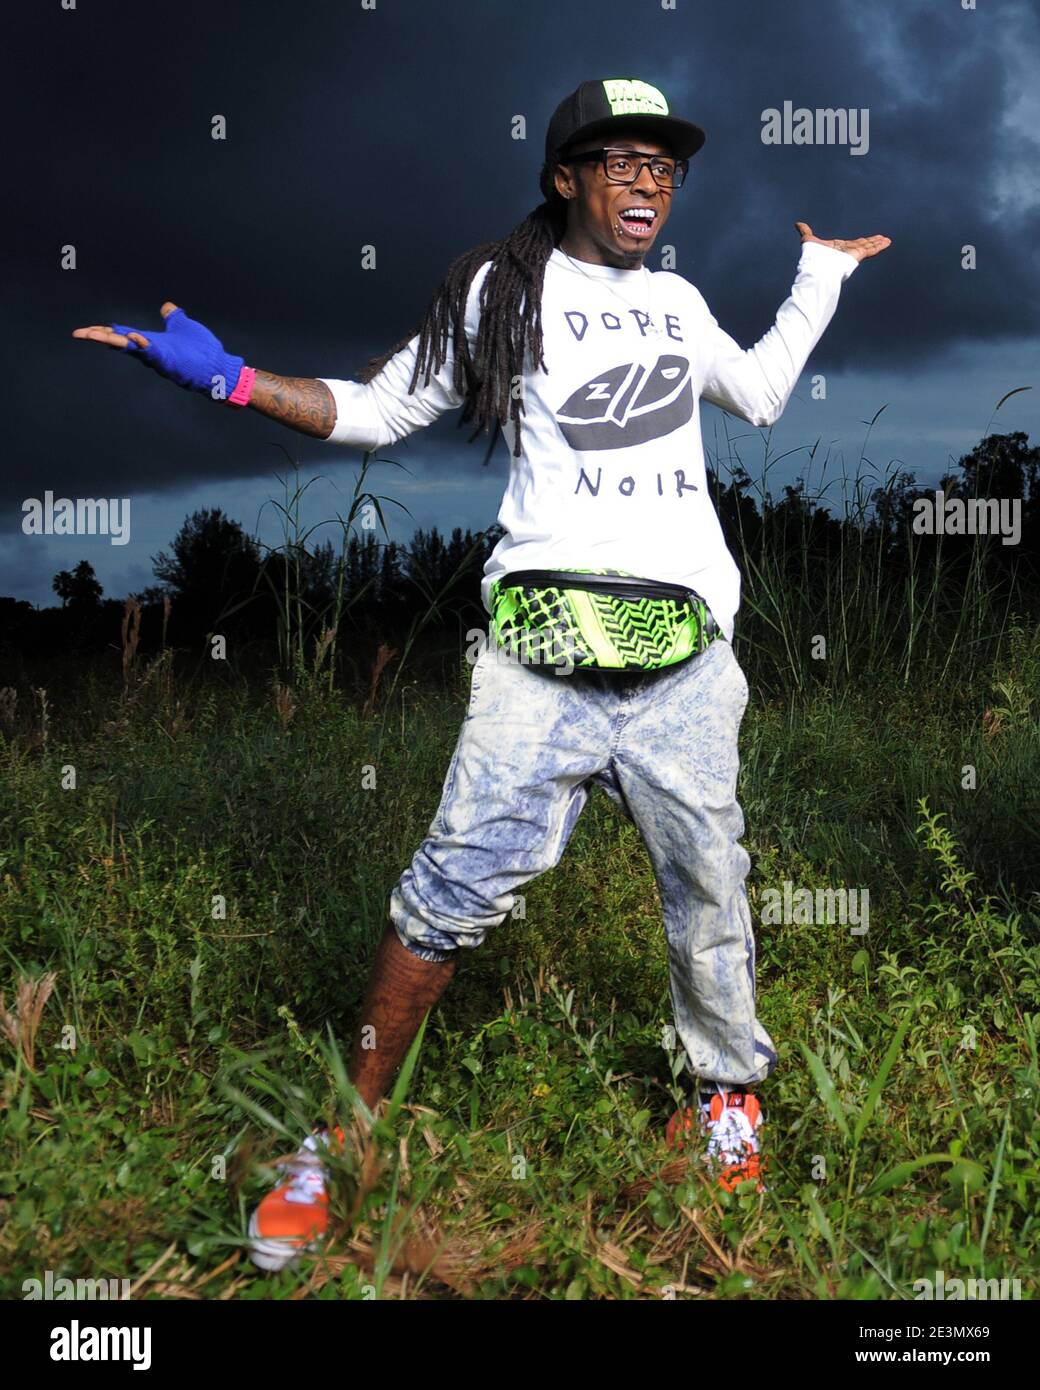 MIAMI, FL - AUGUST 08: Lil Wayne in the weeds. Dwayne Michael Carter, Jr. (born September 27, 1982), known by his stage name Lil Wayne, is an American rapper from New Orleans, Louisiana. In 1991, at the age of nine, Lil Wayne joined Cash Money Records as the youngest member of the label, and half of the duo, The B.G.'z, with fellow New Orleans-based rapper B.G. In 1996, Lil Wayne joined Southern hip hop group Hot Boys, which also included rappers Juvenile, B.G., and Young Turk. Hot Boys debuted with Get It How U Live! that same year. Lil Wayne gained most of his success with the group's major Stock Photo